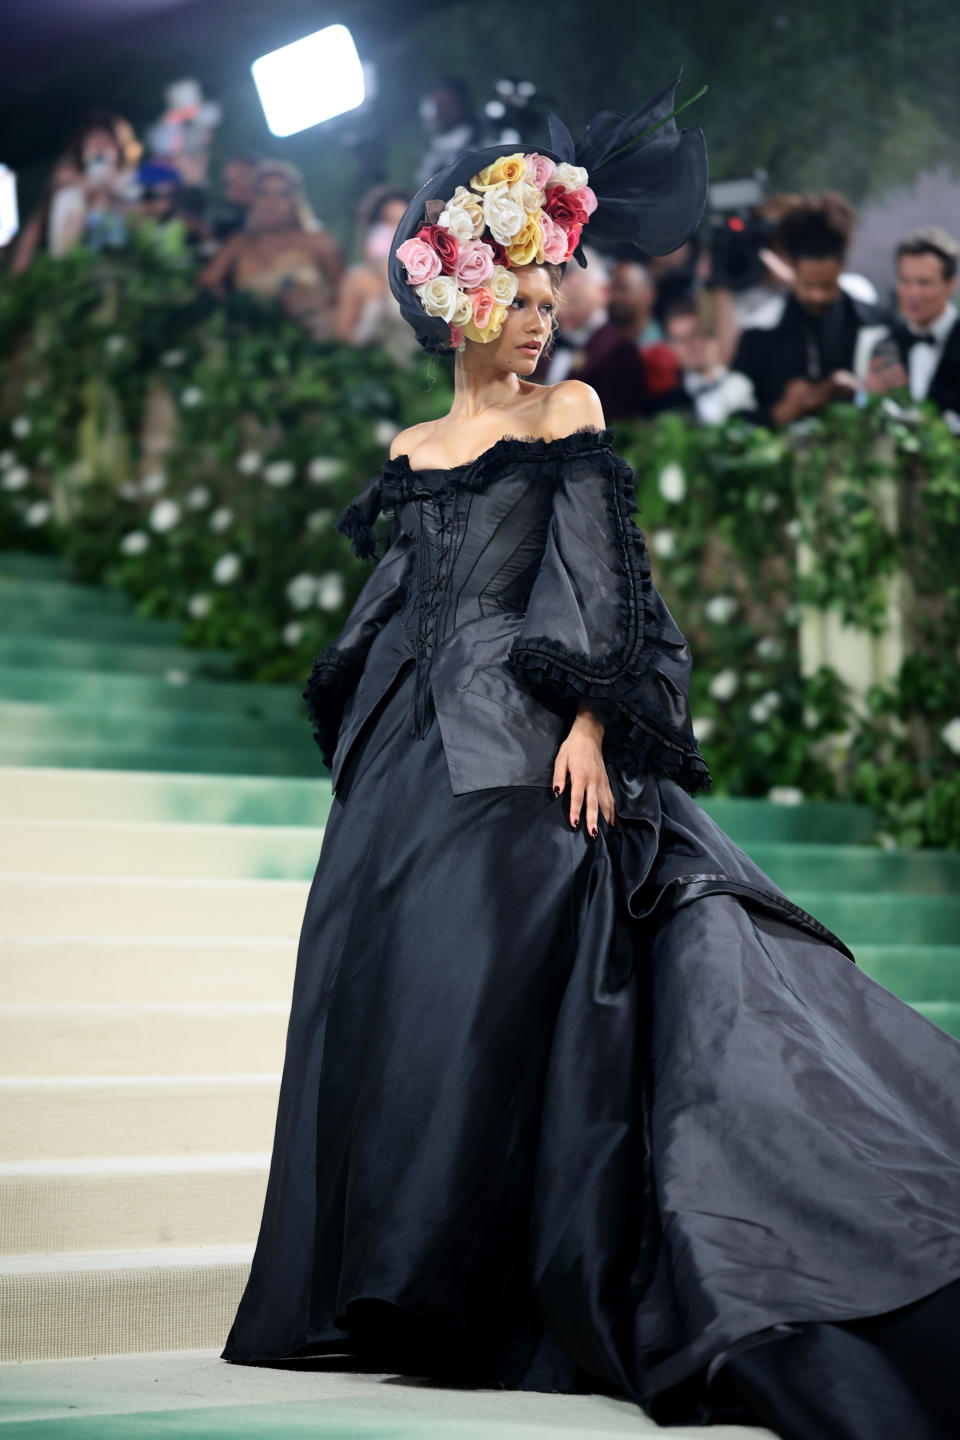 Zendaya in a dramatic off-the-shoulder black gown with an oversized floral headpiece, posing on steps